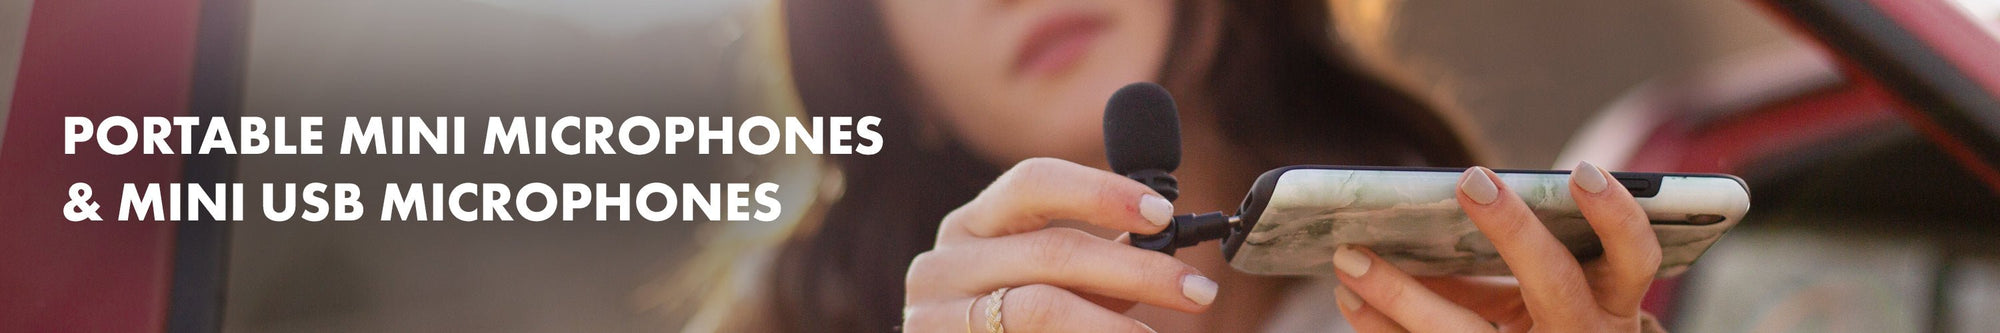 Best Mini Microphones for Recording - Your Pocket-Sized Recording Studio